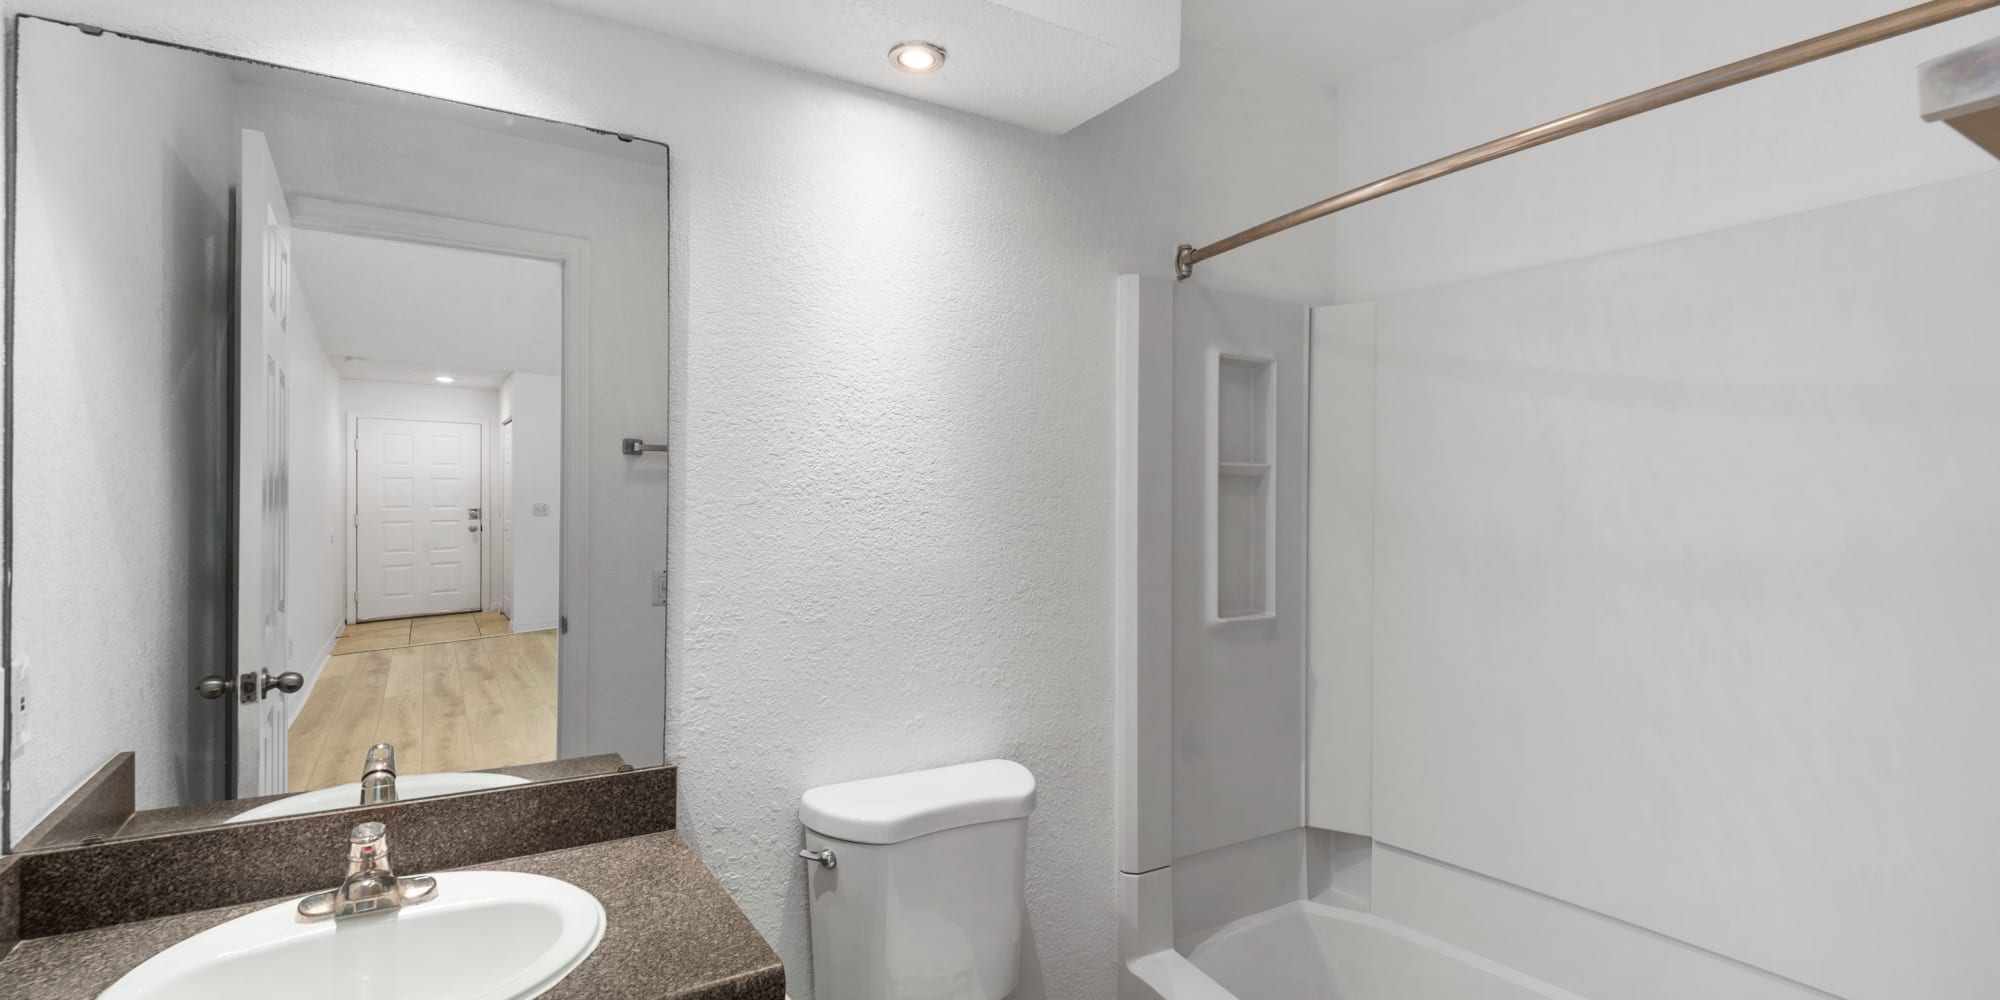 Bathroom with tub at Stone Creek at Wekiva in Altamonte Springs, Florida